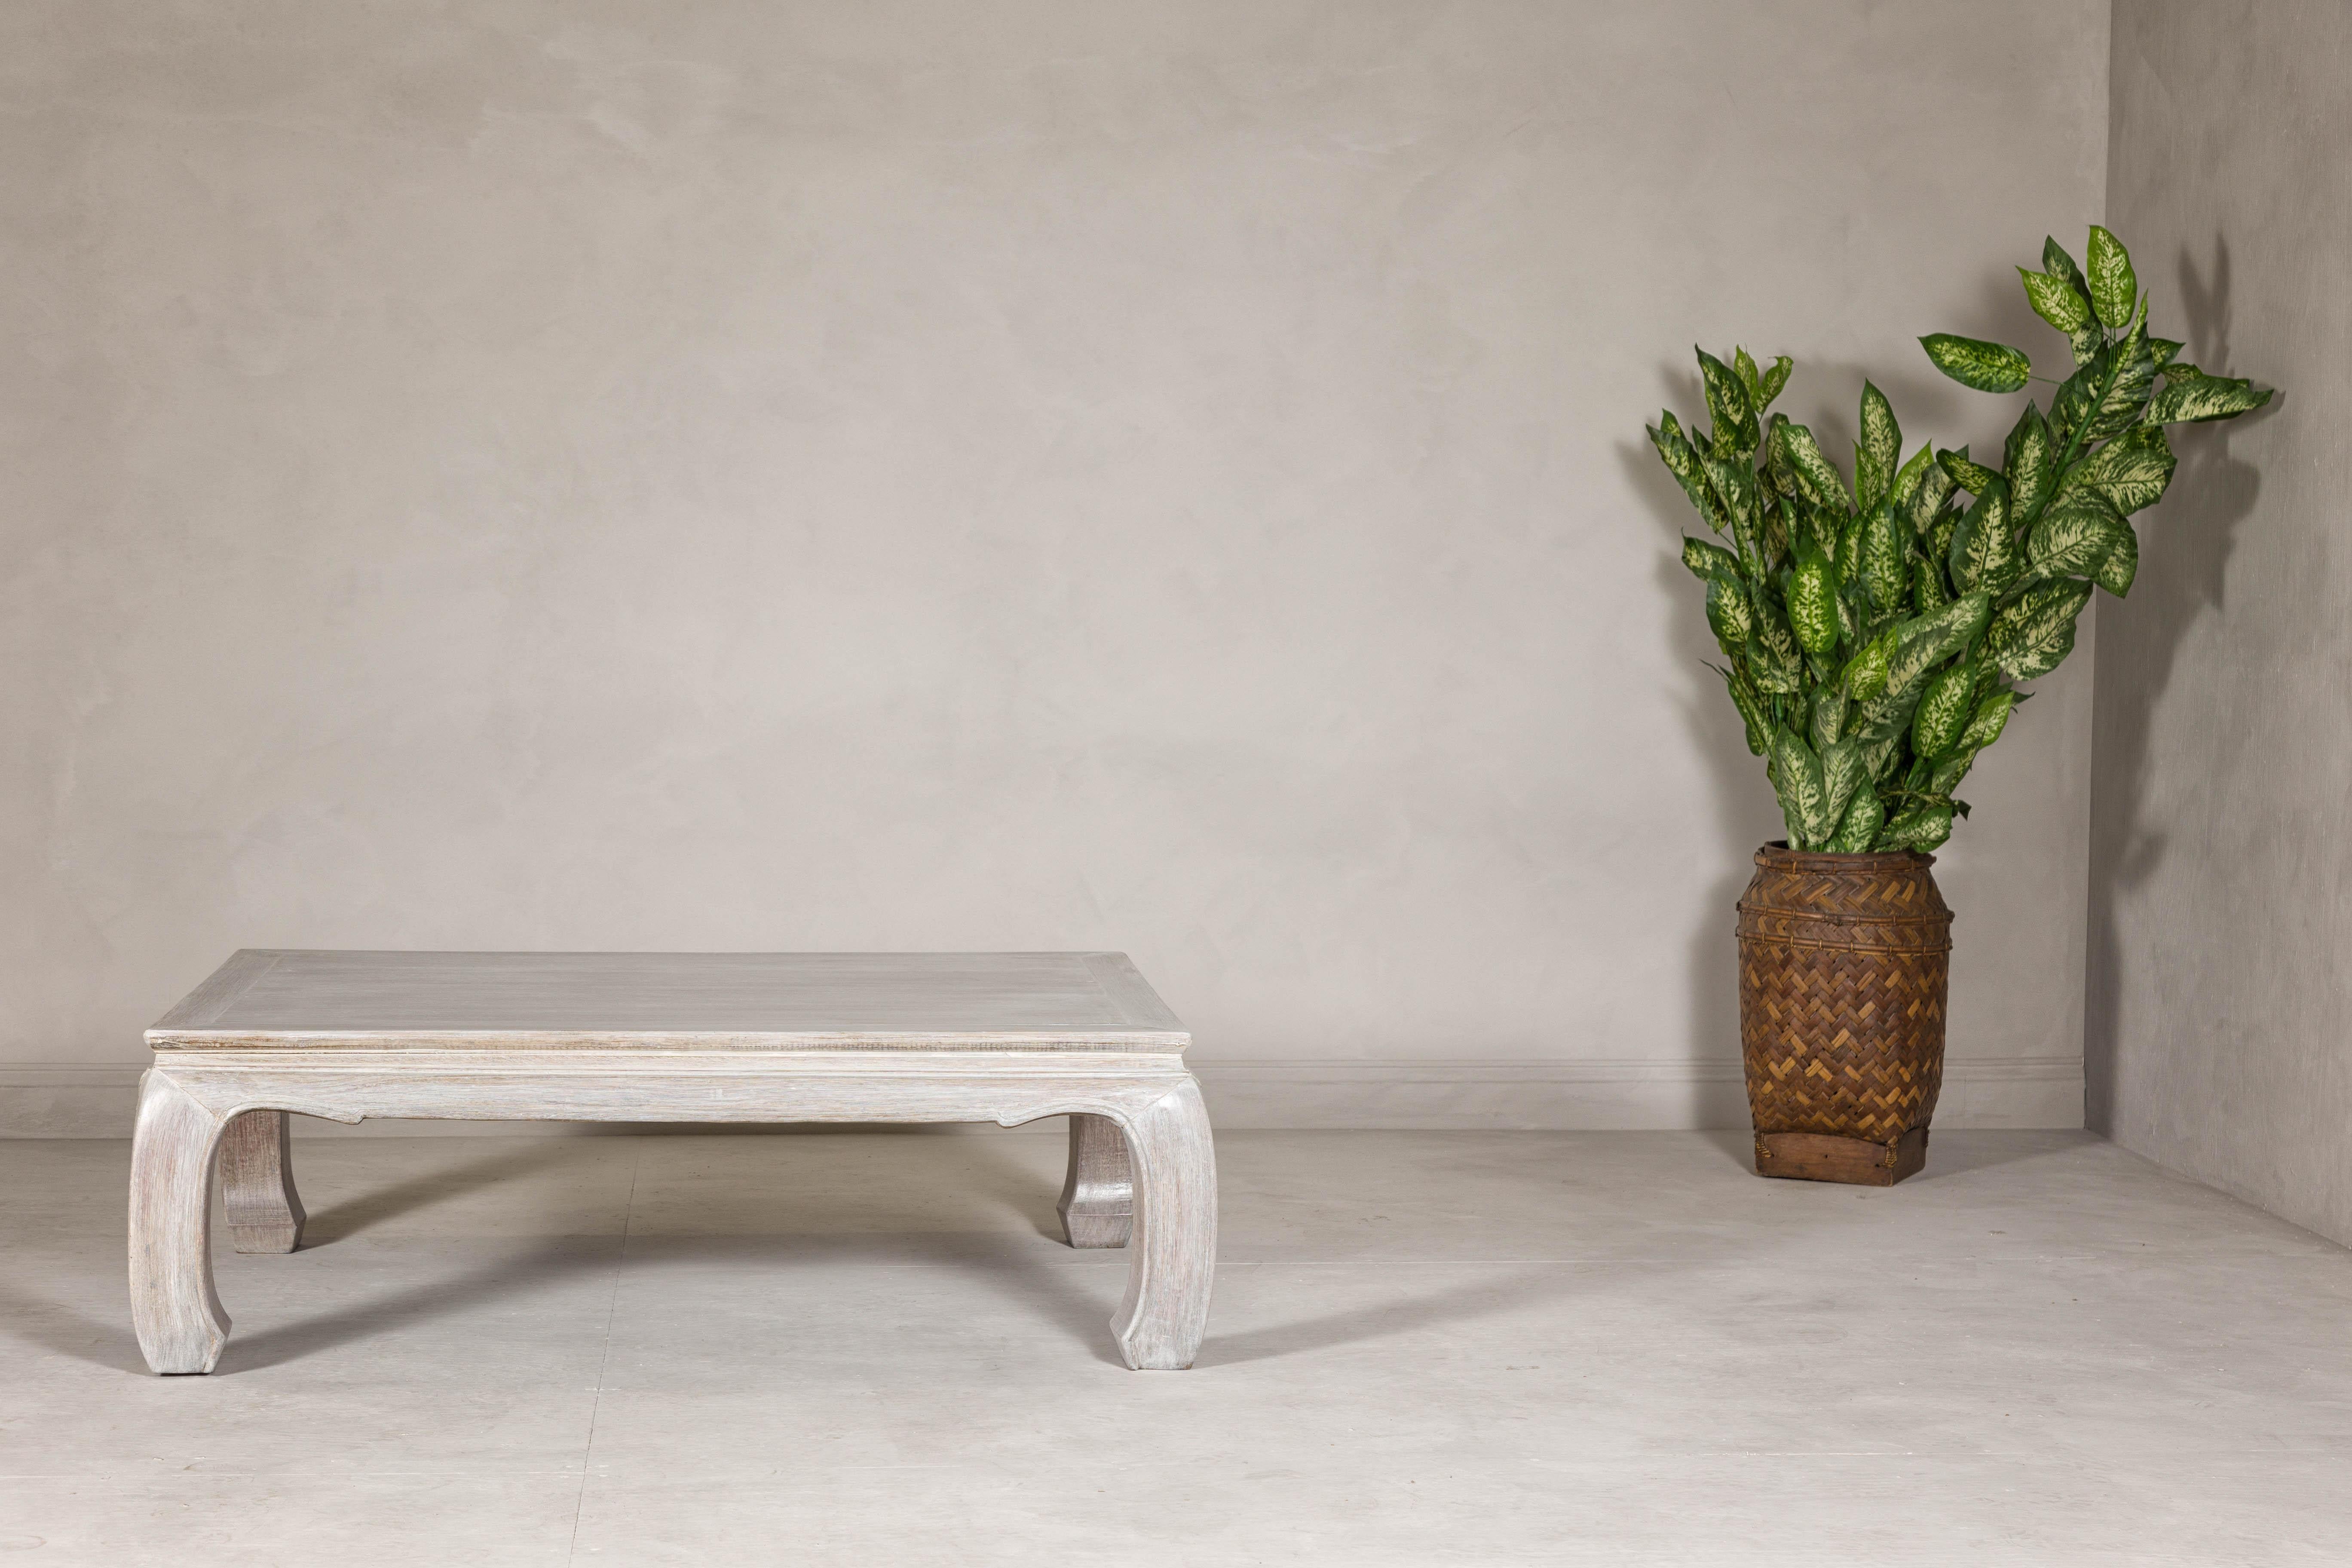 A teak wood Ming style whitewash coffee table from the 20th century with chow legs and weathered patina. This vintage teak wood coffee table, styled in the Ming tradition and finished with a whitewash, breathes a serene, timeless elegance into any